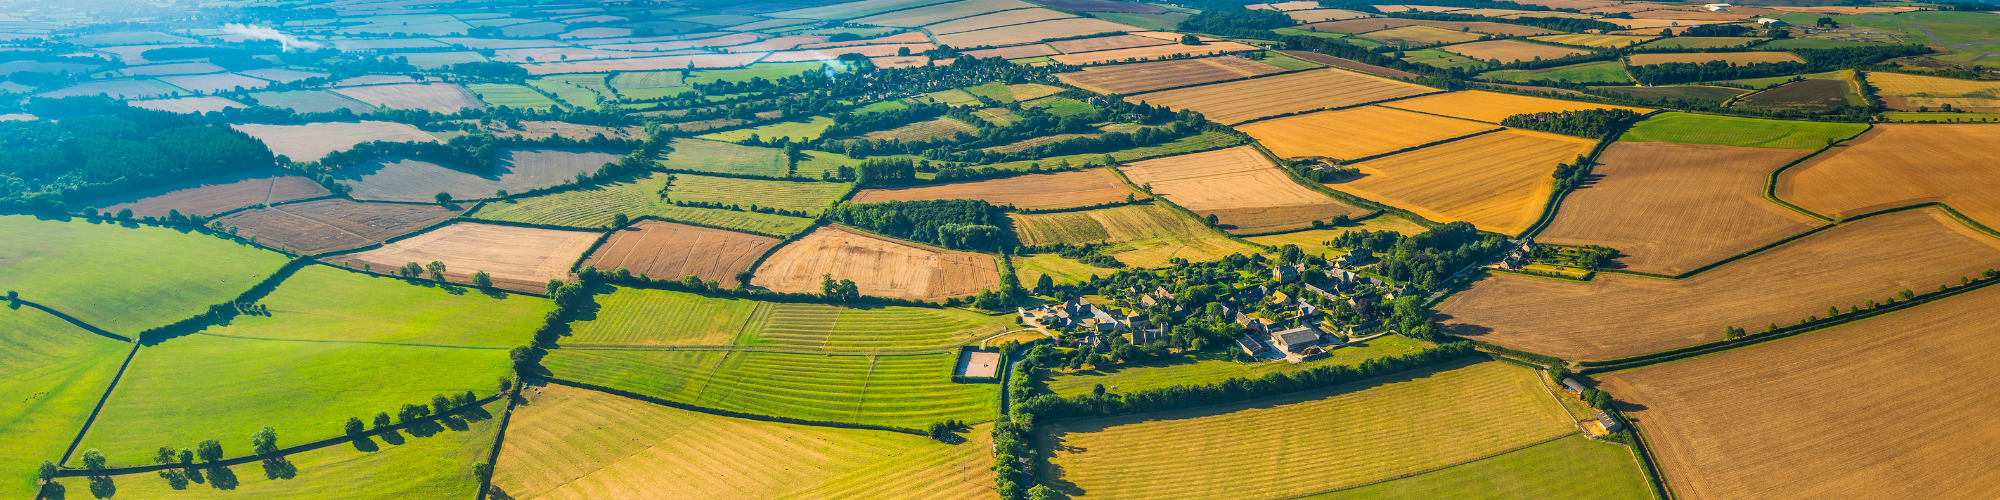 UK Agricultural Policy - What’s New?